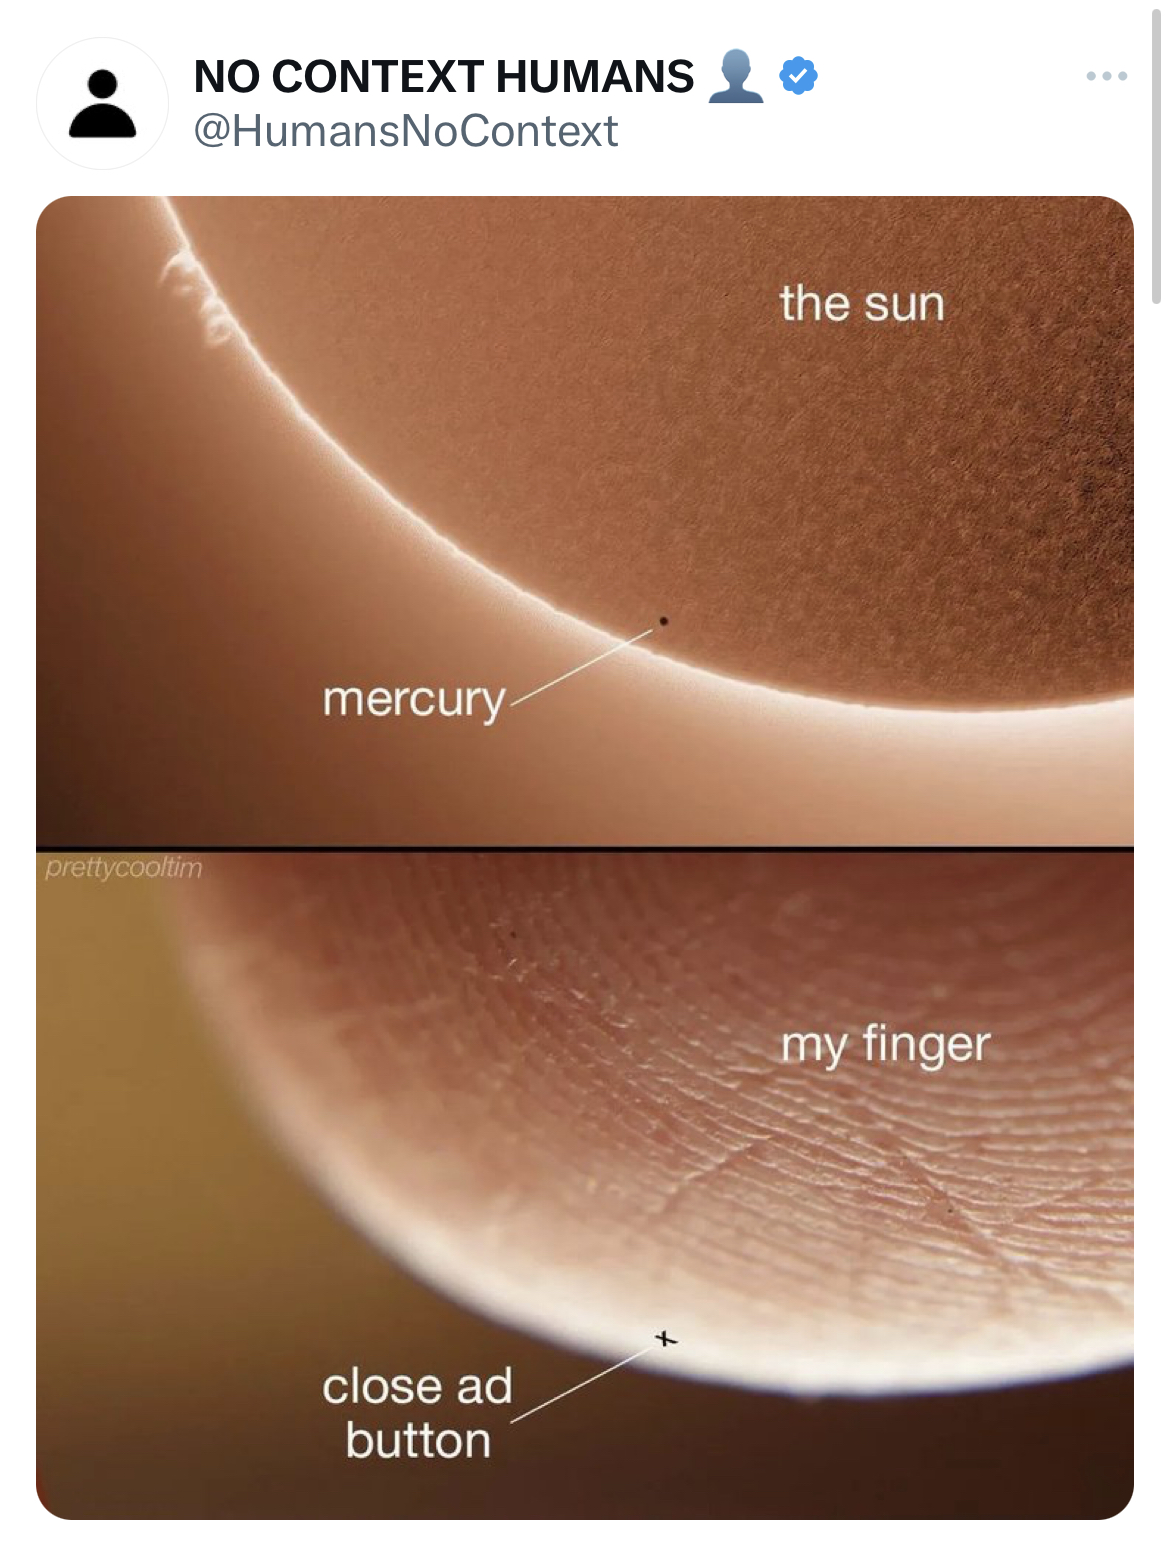 savage tweets - close up - No Context Humans mercury close ad button the sun my finger